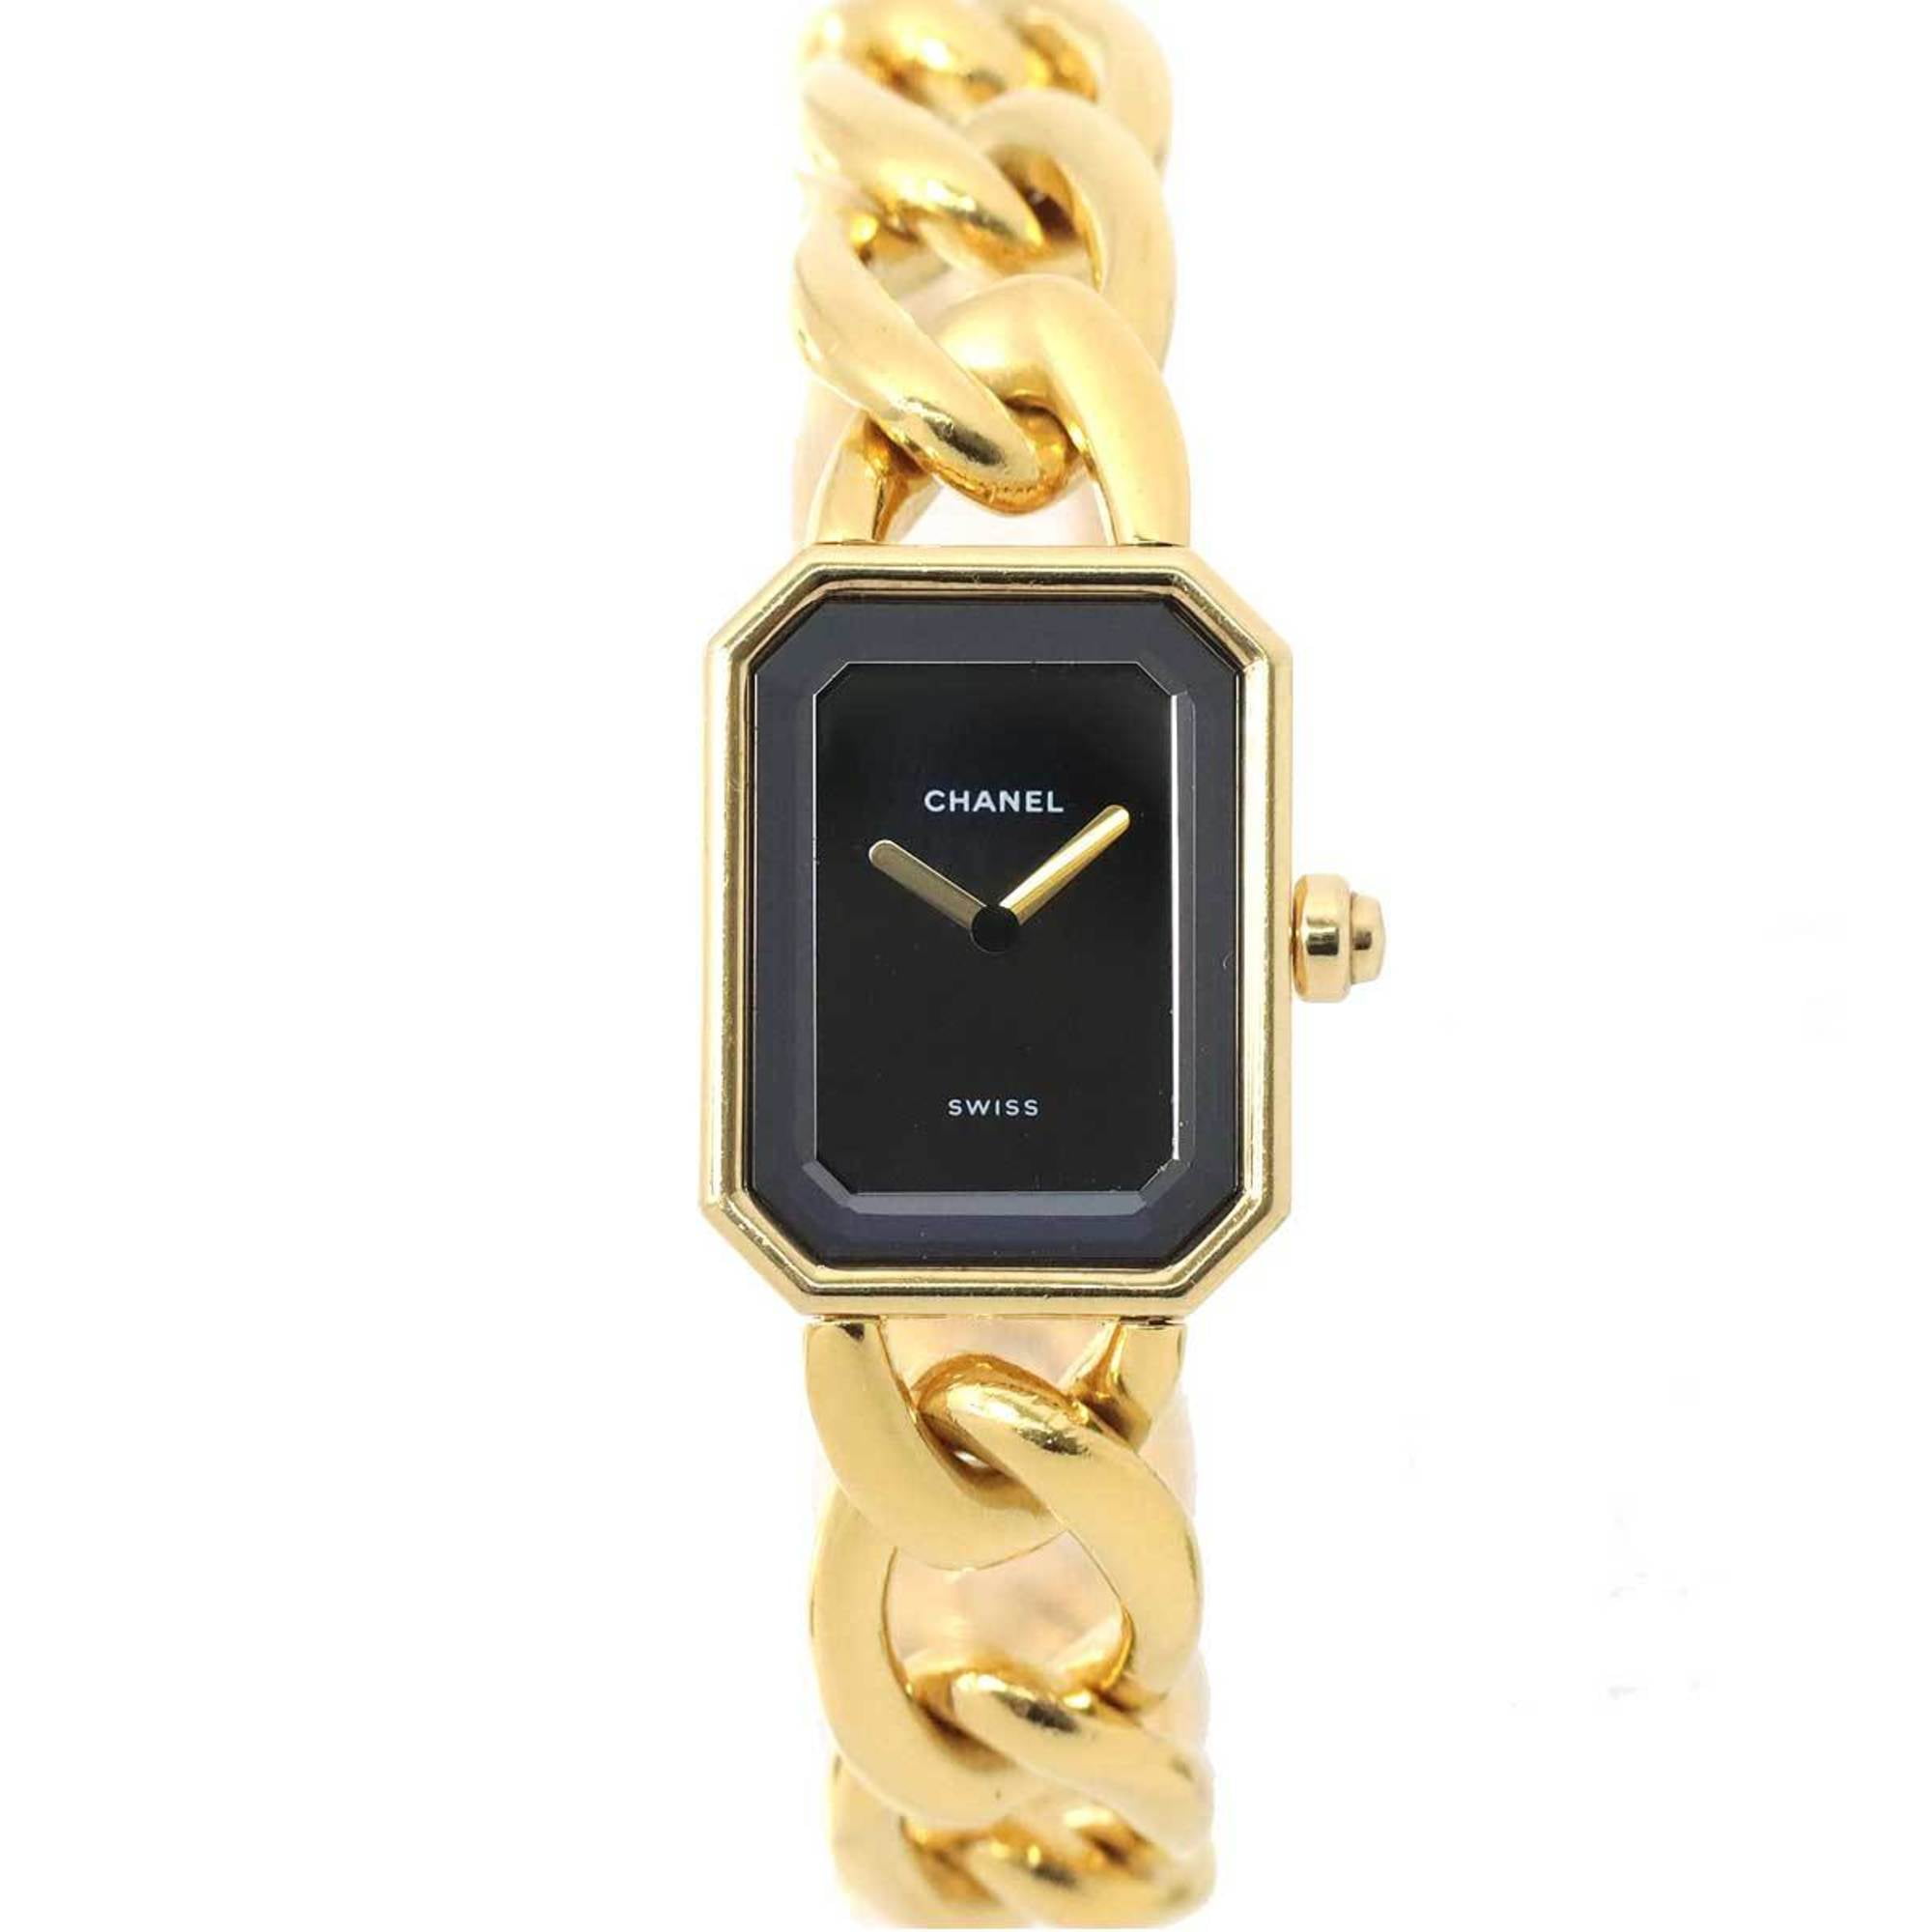 Chanel - Authenticated Watch - Yellow Gold Black for Women, Good Condition